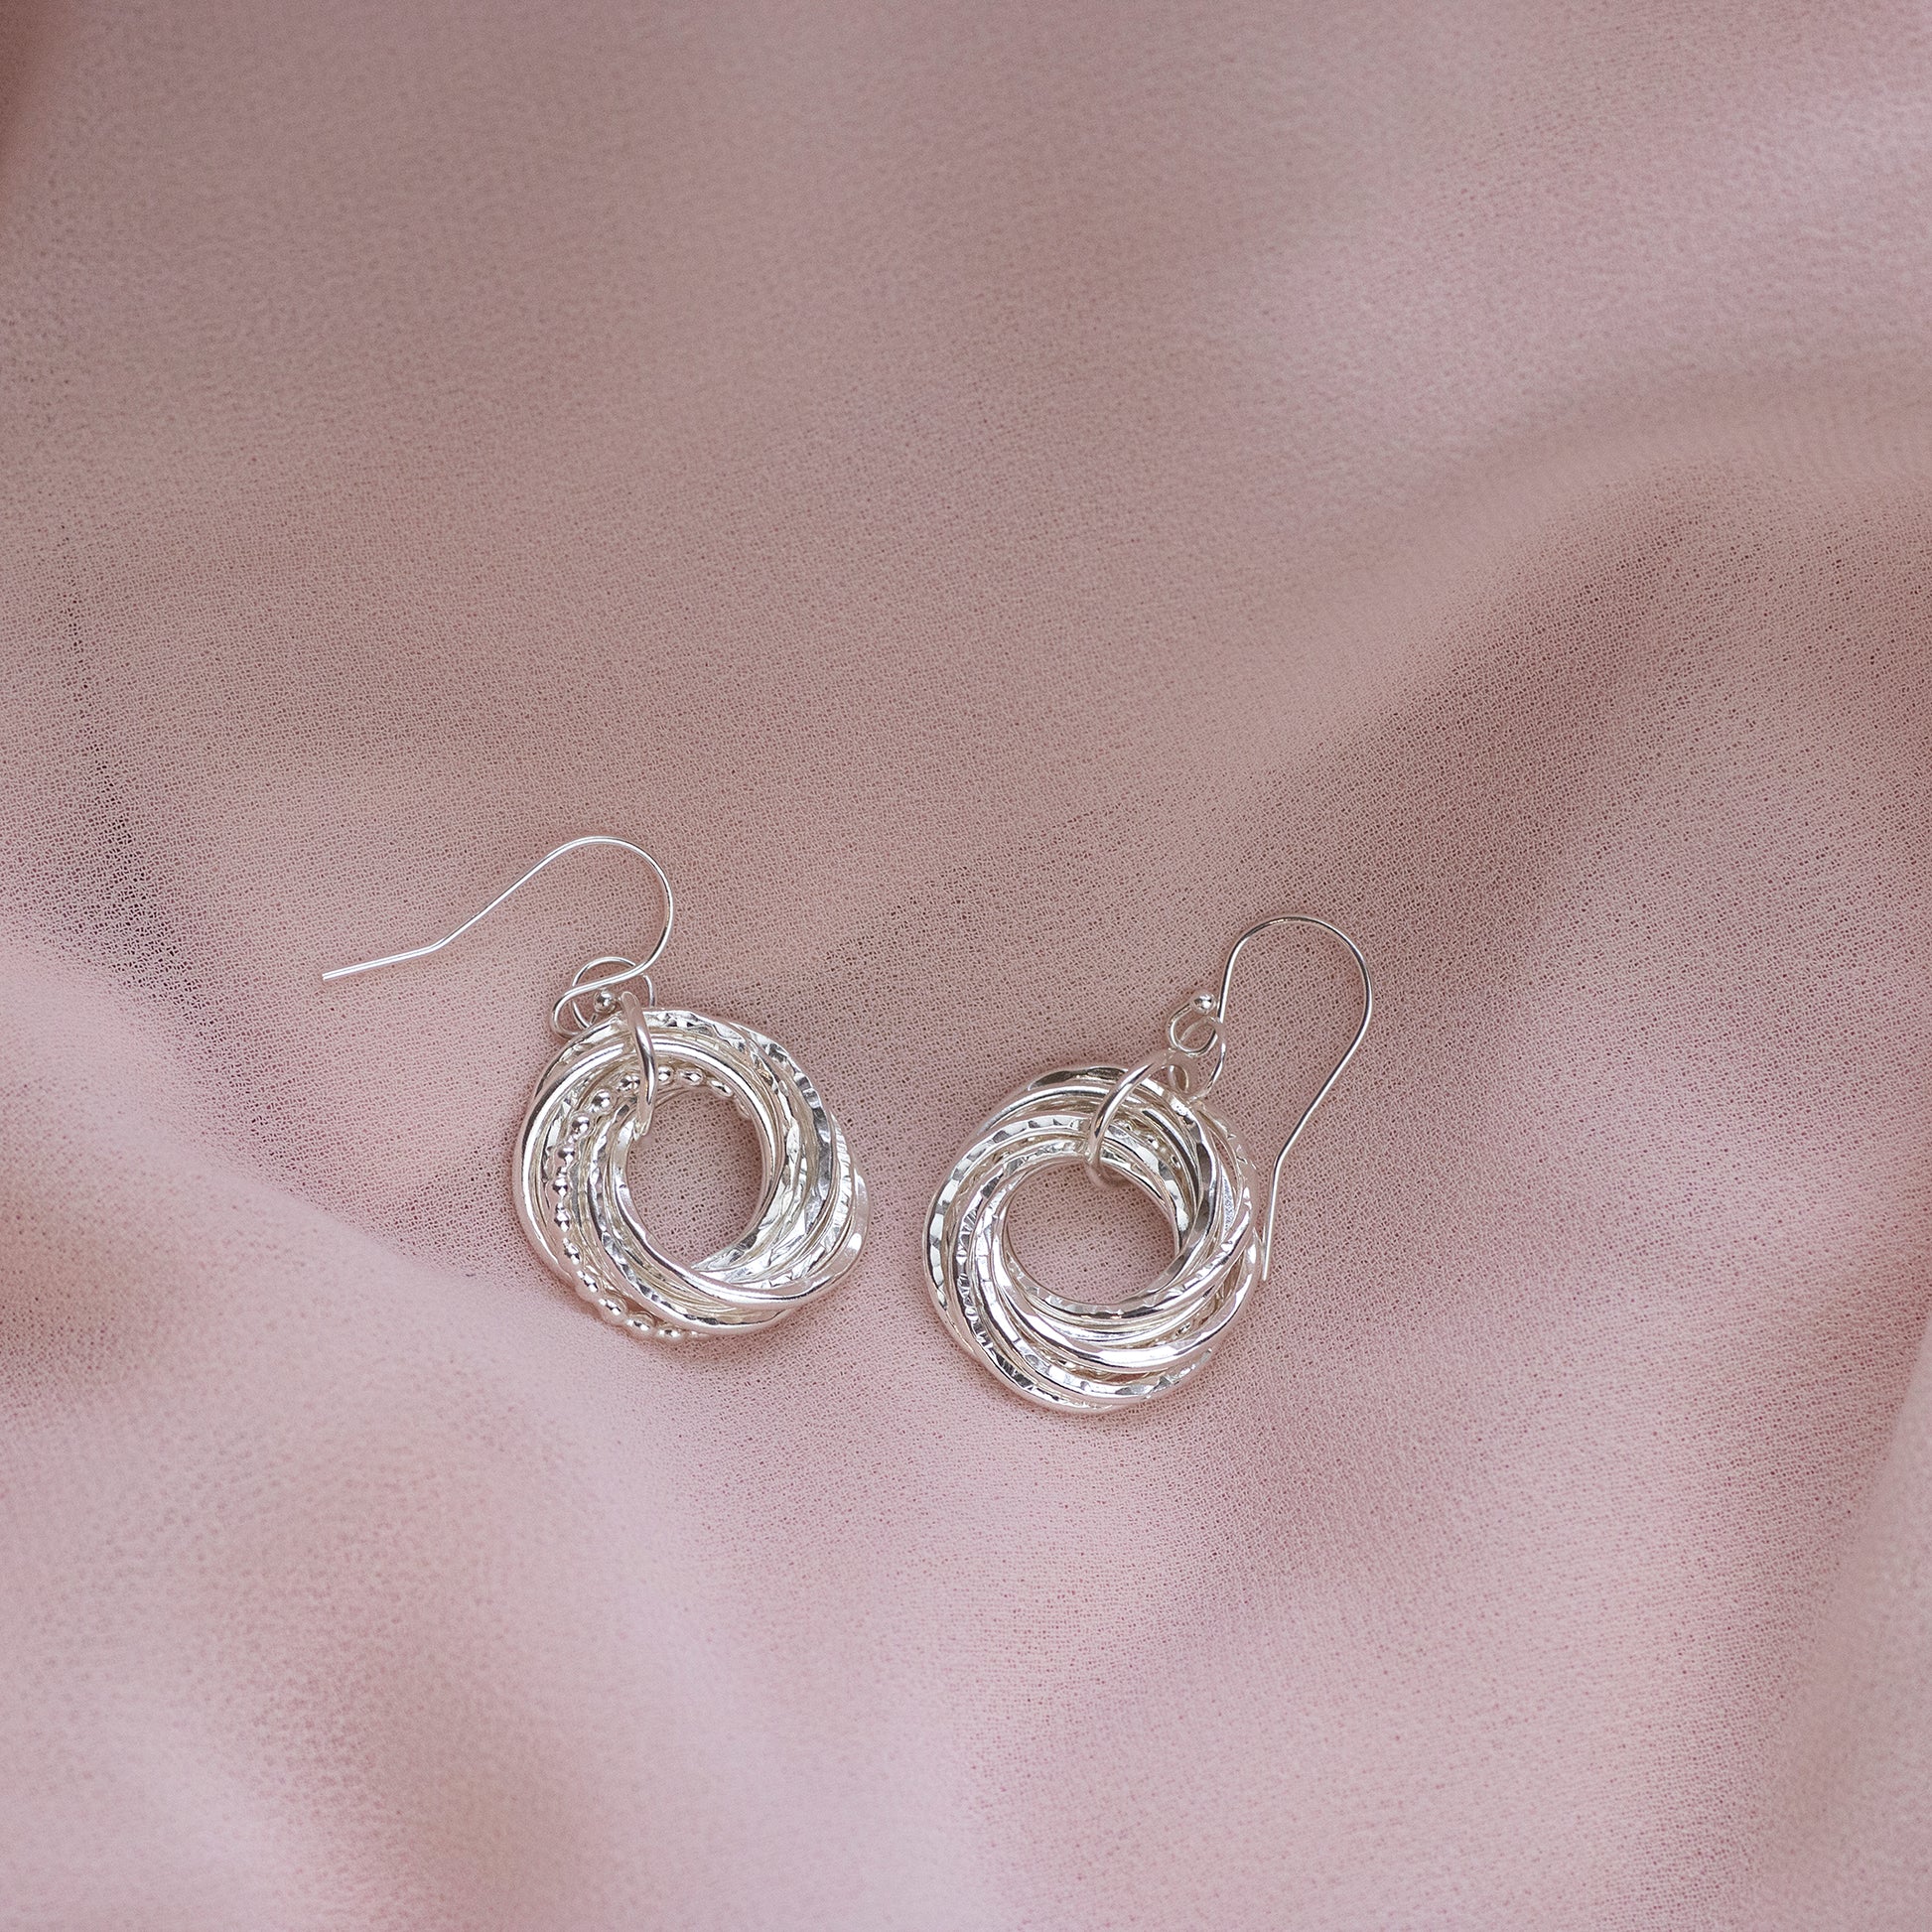 90th Birthday Earrings - 9 Links for 9 Decades - Silver